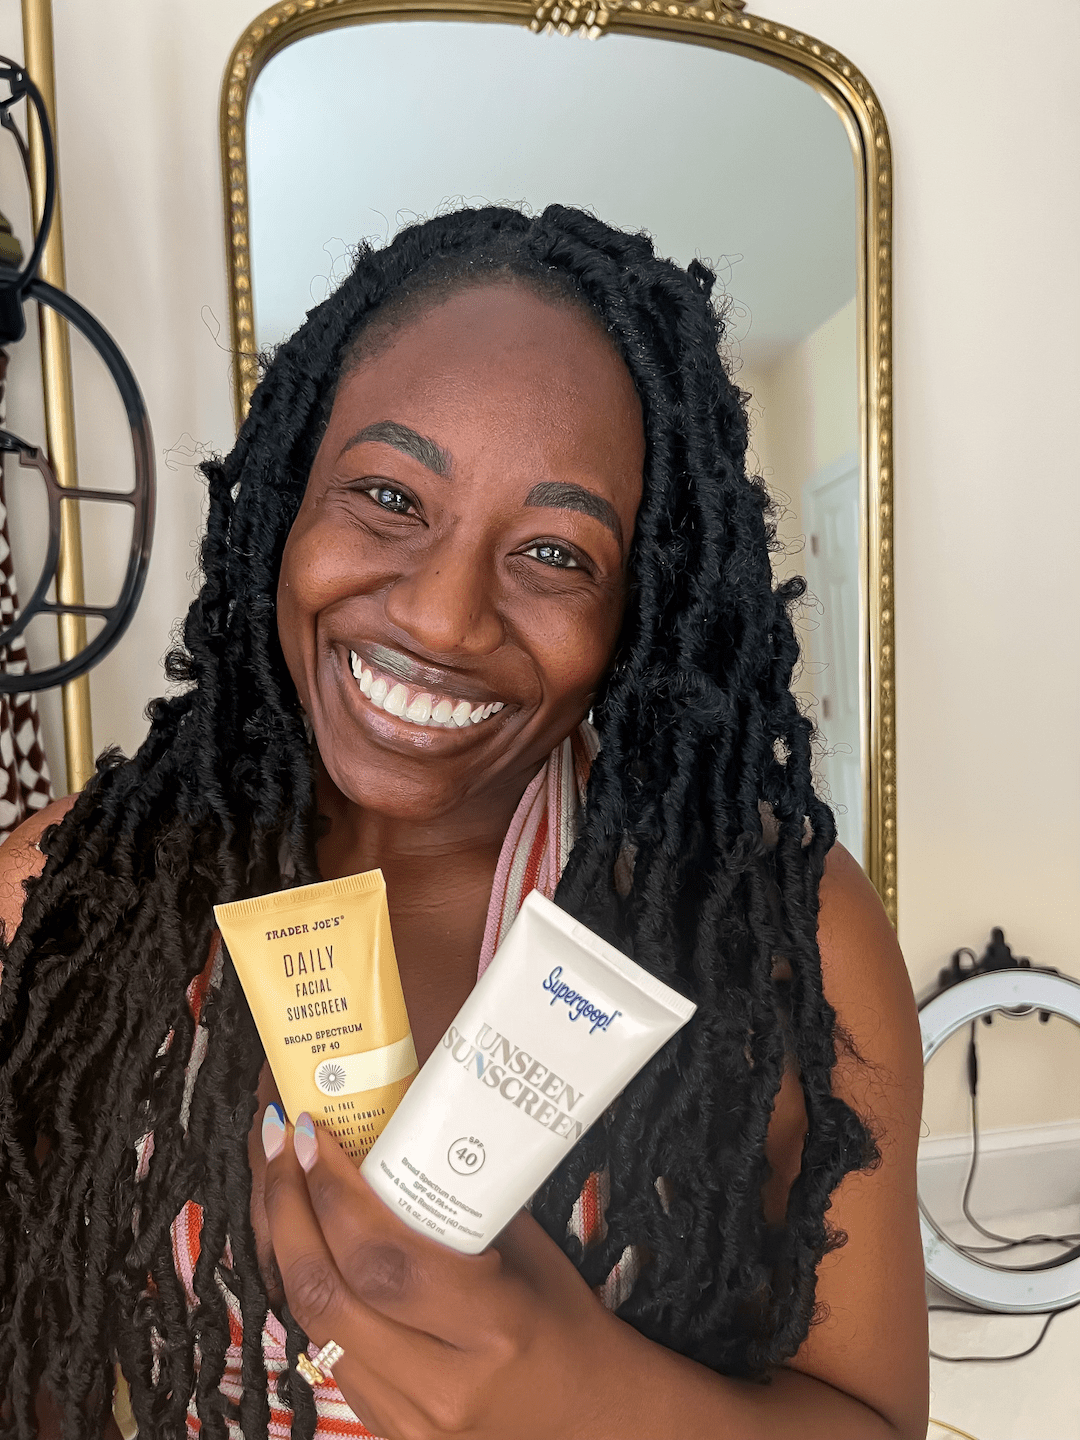 supergroup unseen sunscreen vs trader joes sunscreen dupe | Supergoop vs. Trader Joe’s Sunscreen